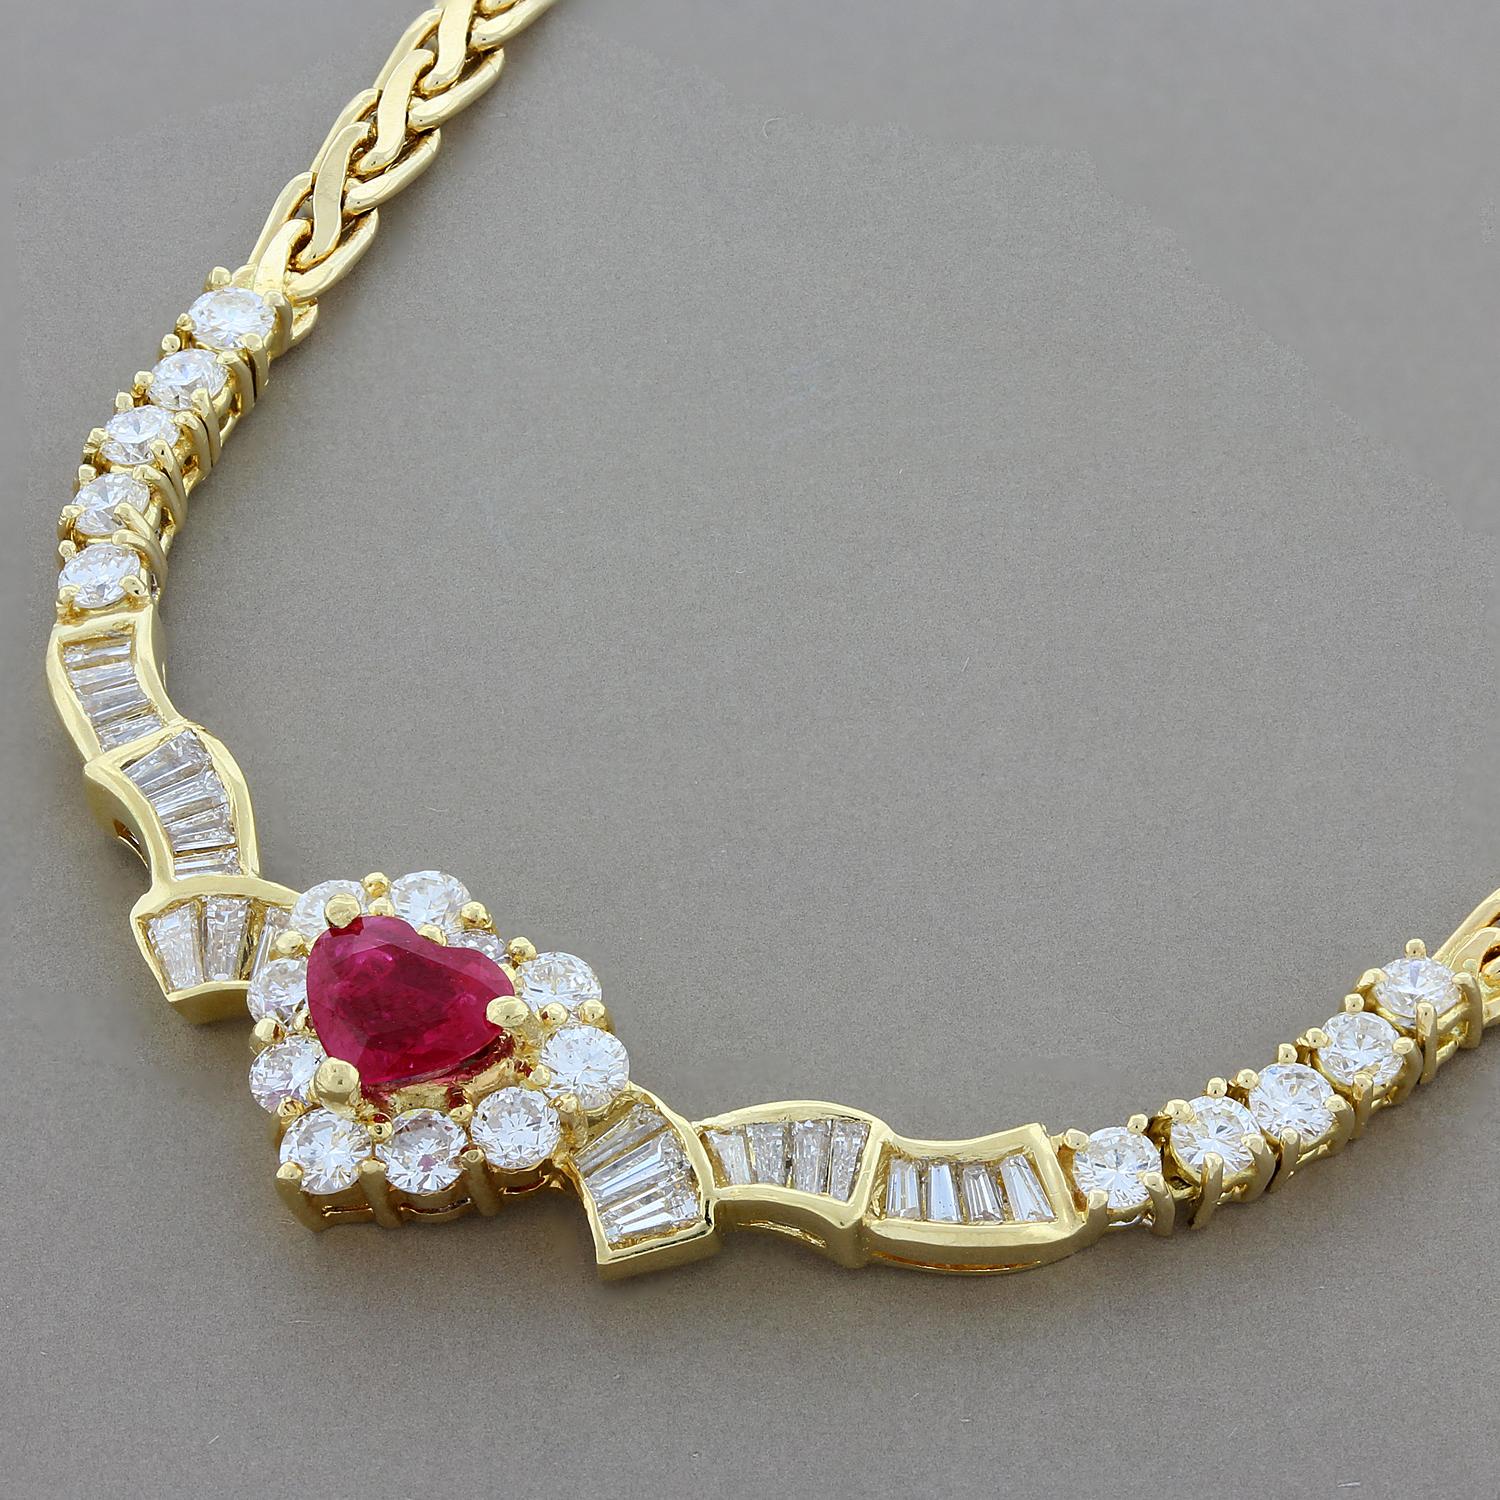 This beautifully designed necklace features a 0.91 carat heart shaped ruby accented by 2.37 carats of VS quality round and baguette cut diamonds. The 18K yellow gold setting has a quilted chain with a lobster claw clasp for a secure